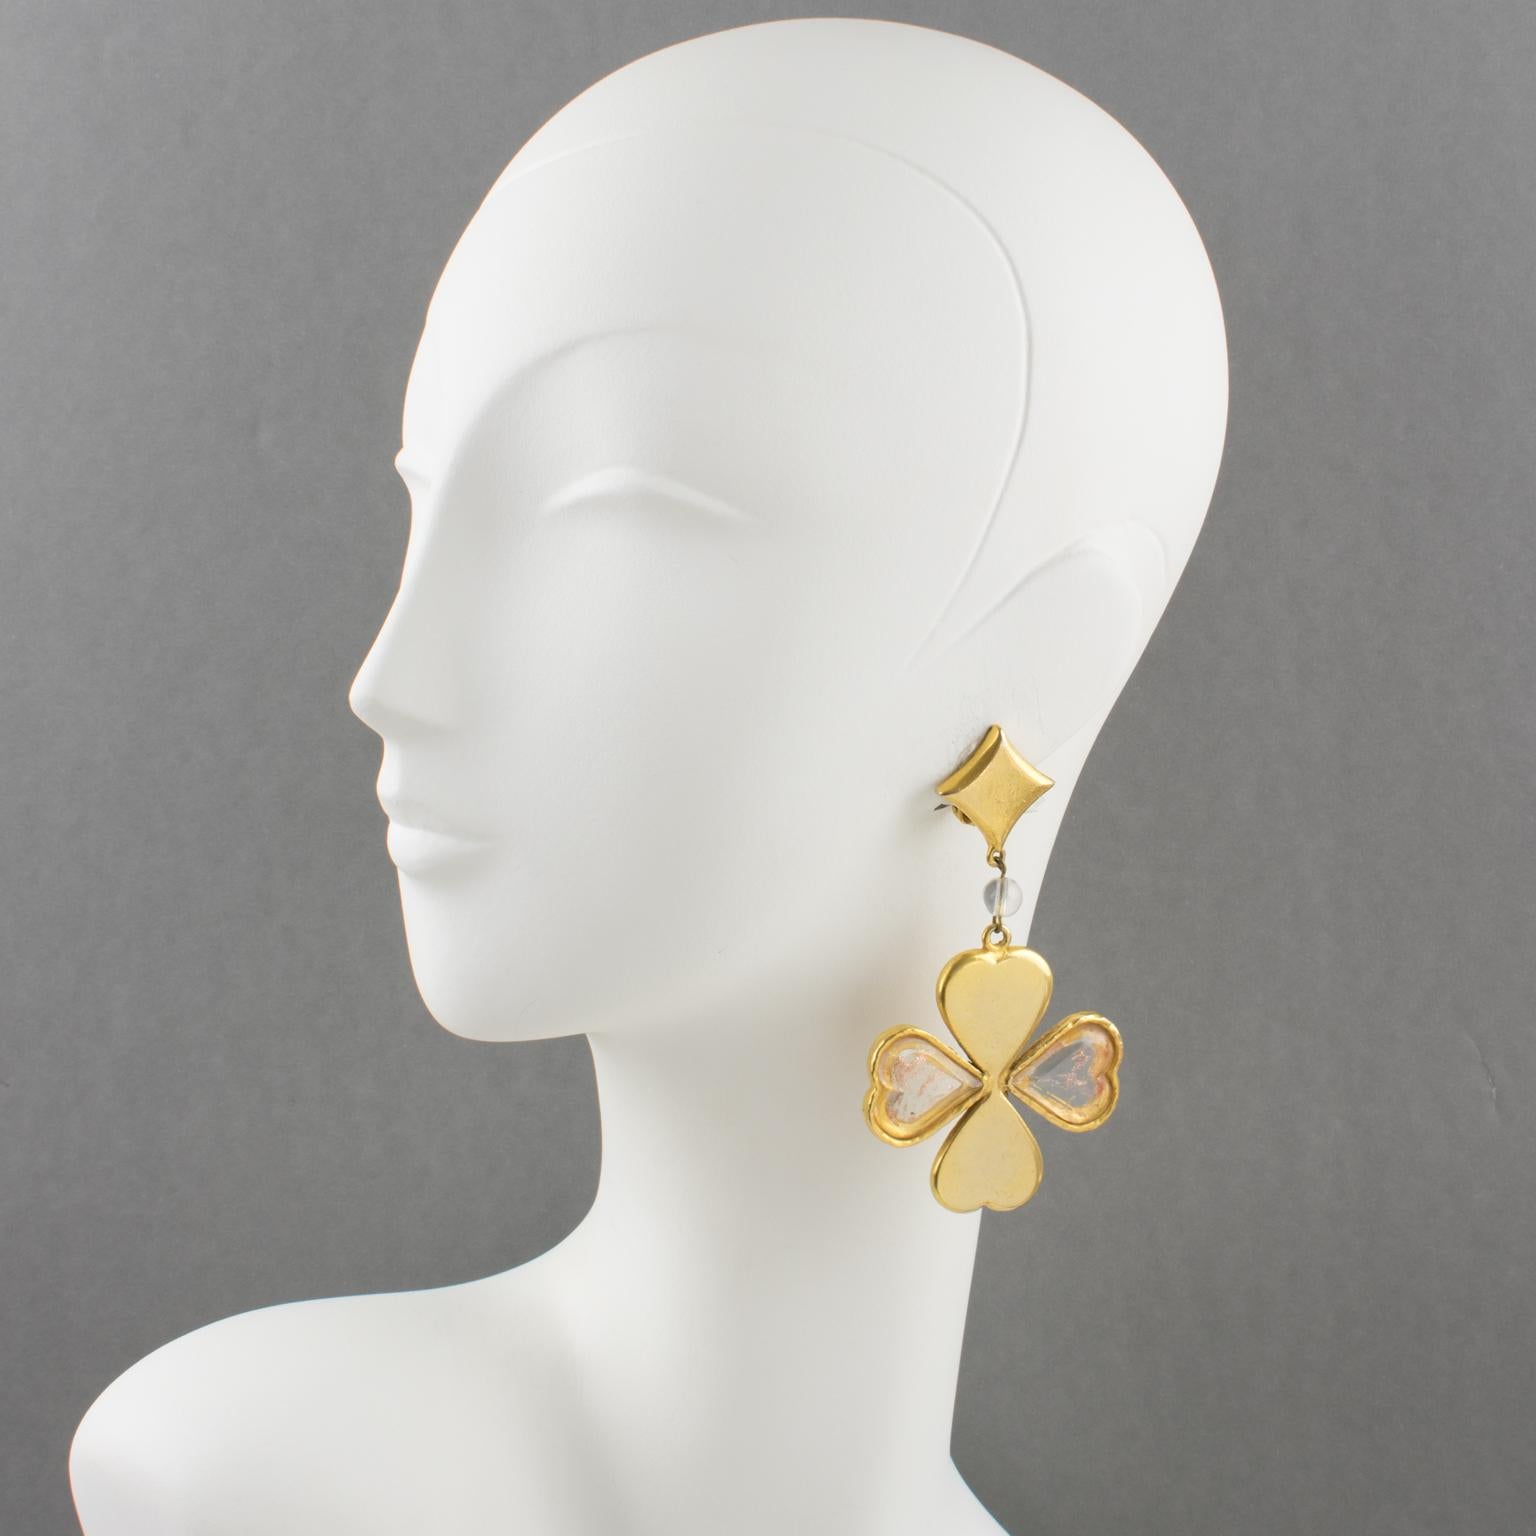 These lovely Kenzo Paris signed clip-on earrings feature a long dangling drop shape with a four-leaf clover design and heart-shaped petals. The gilt metal framing is all textured with a beveled glass insert. The glass inserts have gold flakes